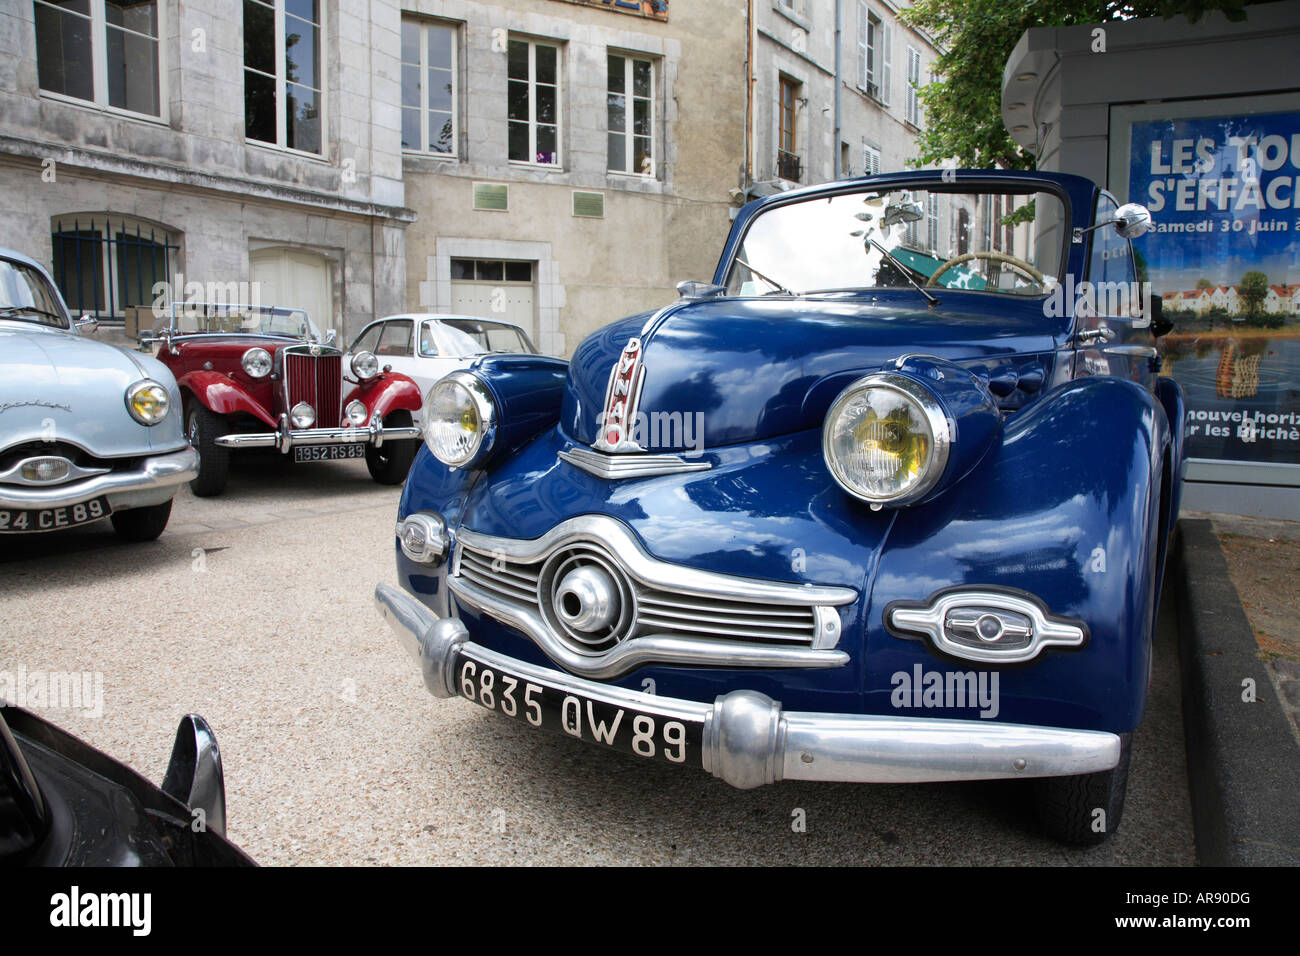 Vintage Cars in Auxerre, Burgundy, France, featuring a Panhard Dyna in the foreground. Stock Photo